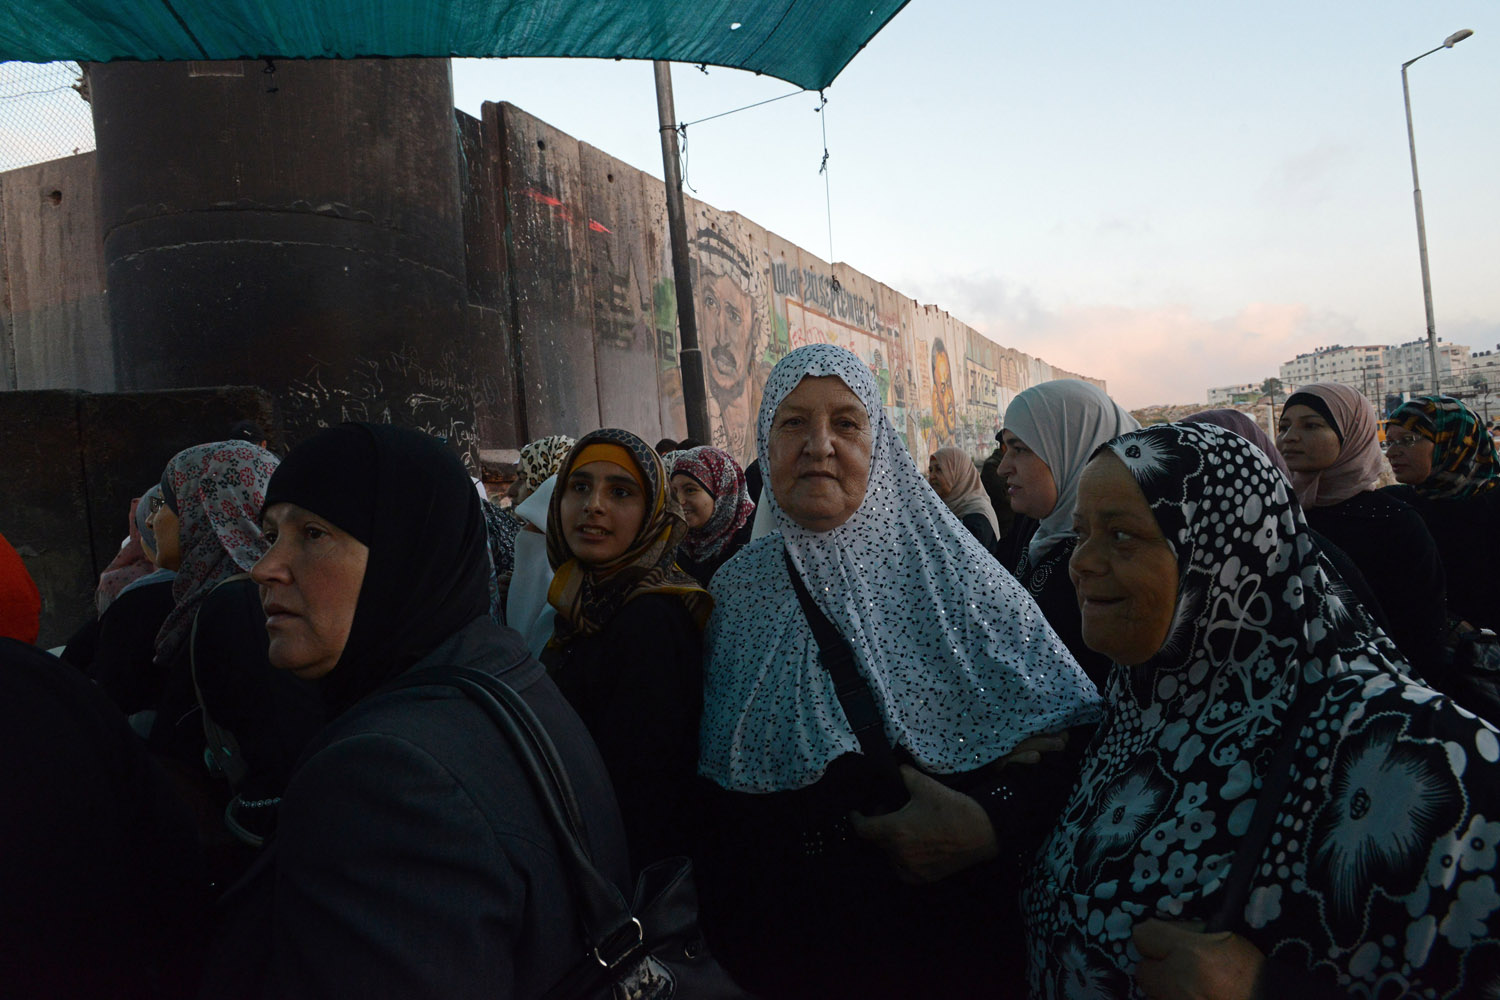 July 12, 2013. Palestinians from the West Bank wait to cross the Qalandiya Checkpoint  on their way to pray in Jerusalem on the first Friday  of the Muslim holy month of Ramadan.